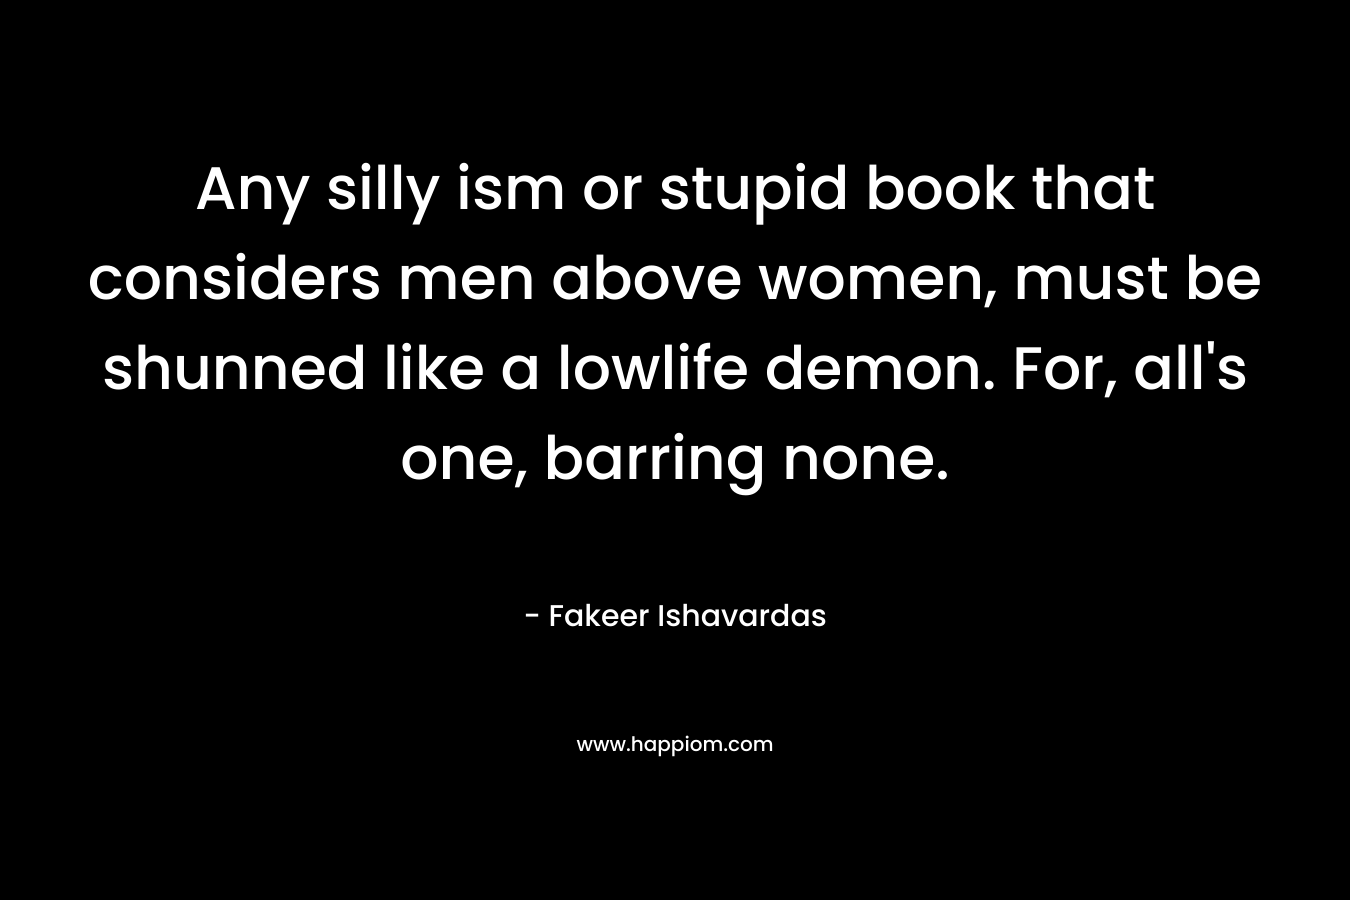 Any silly ism or stupid book that considers men above women, must be shunned like a lowlife demon. For, all’s one, barring none. – Fakeer Ishavardas